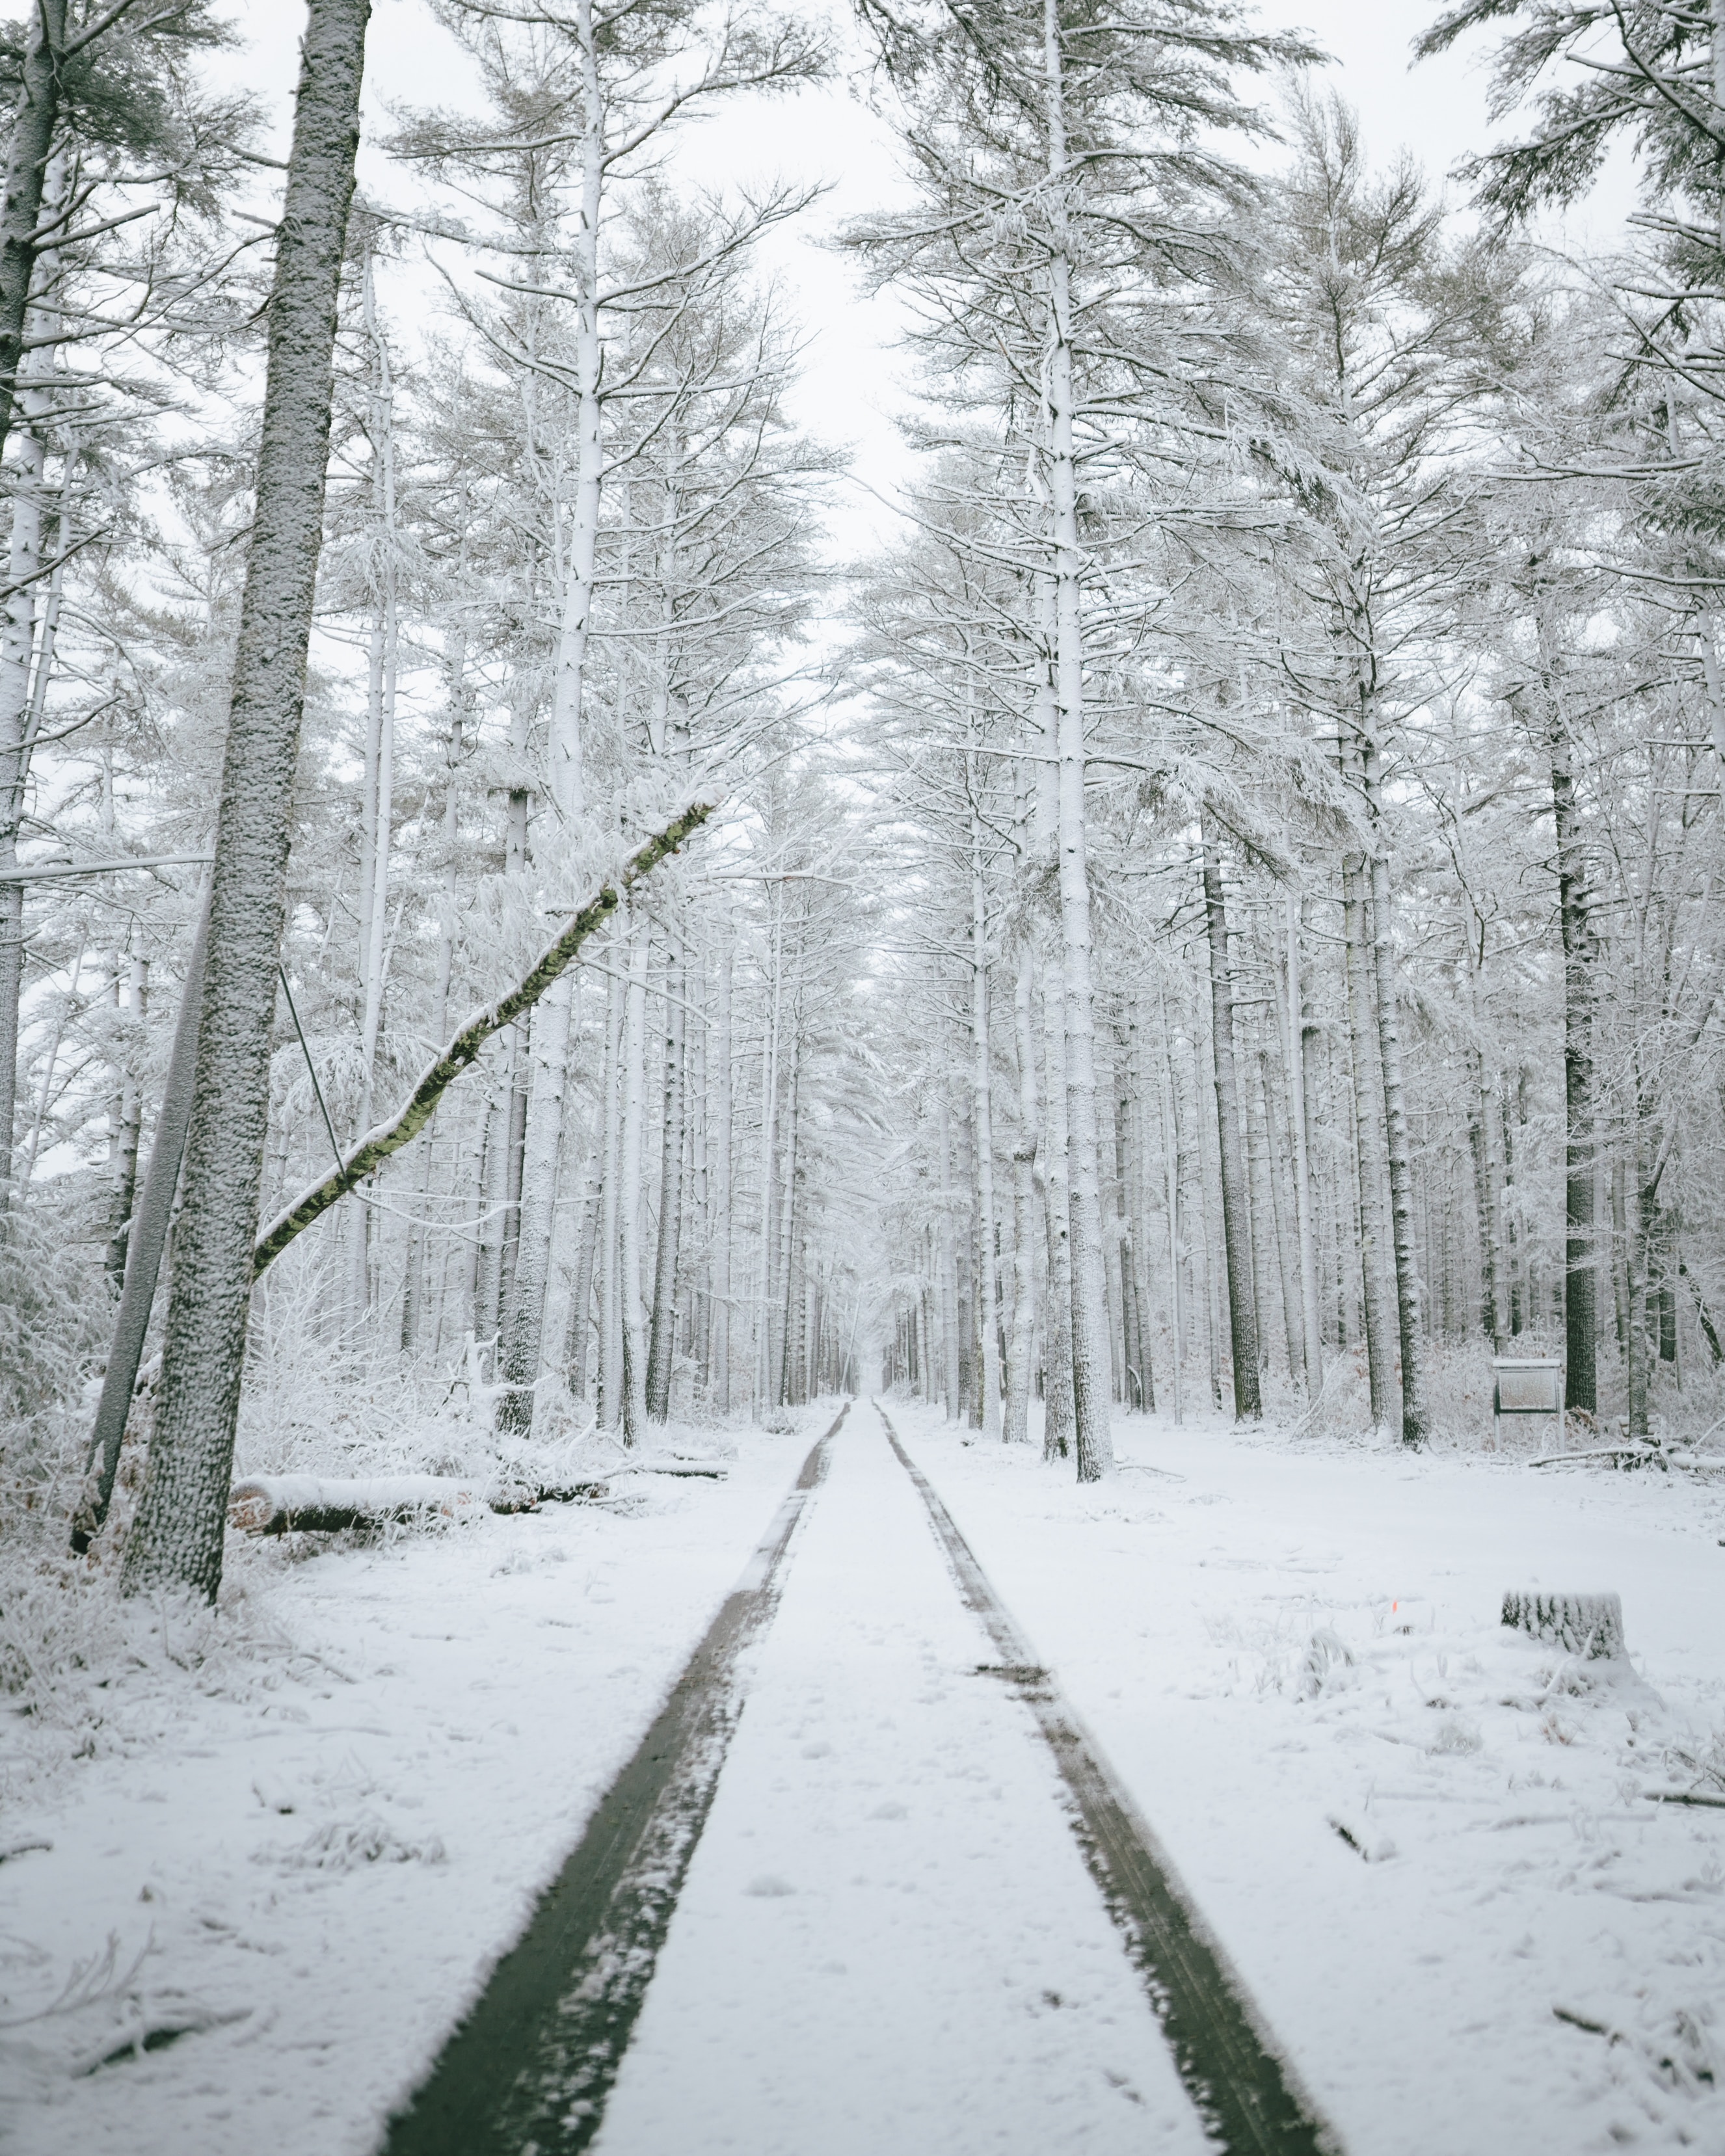 New Lock Screen Wallpapers winter, forest, nature, trees, snow, road